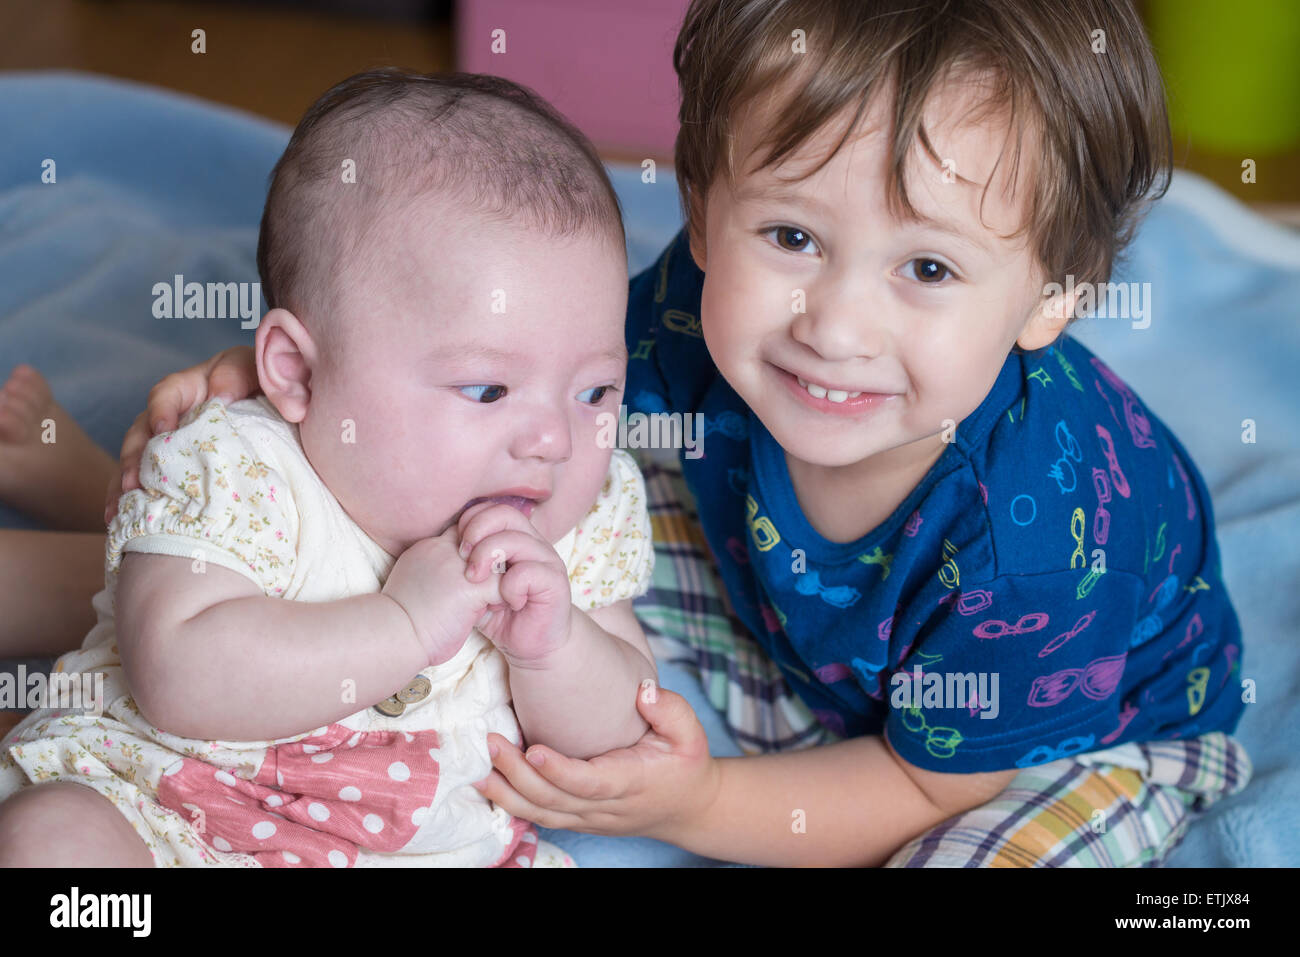 A 2 year old boy and his newborn sister sitting on a bed. Stock Photo